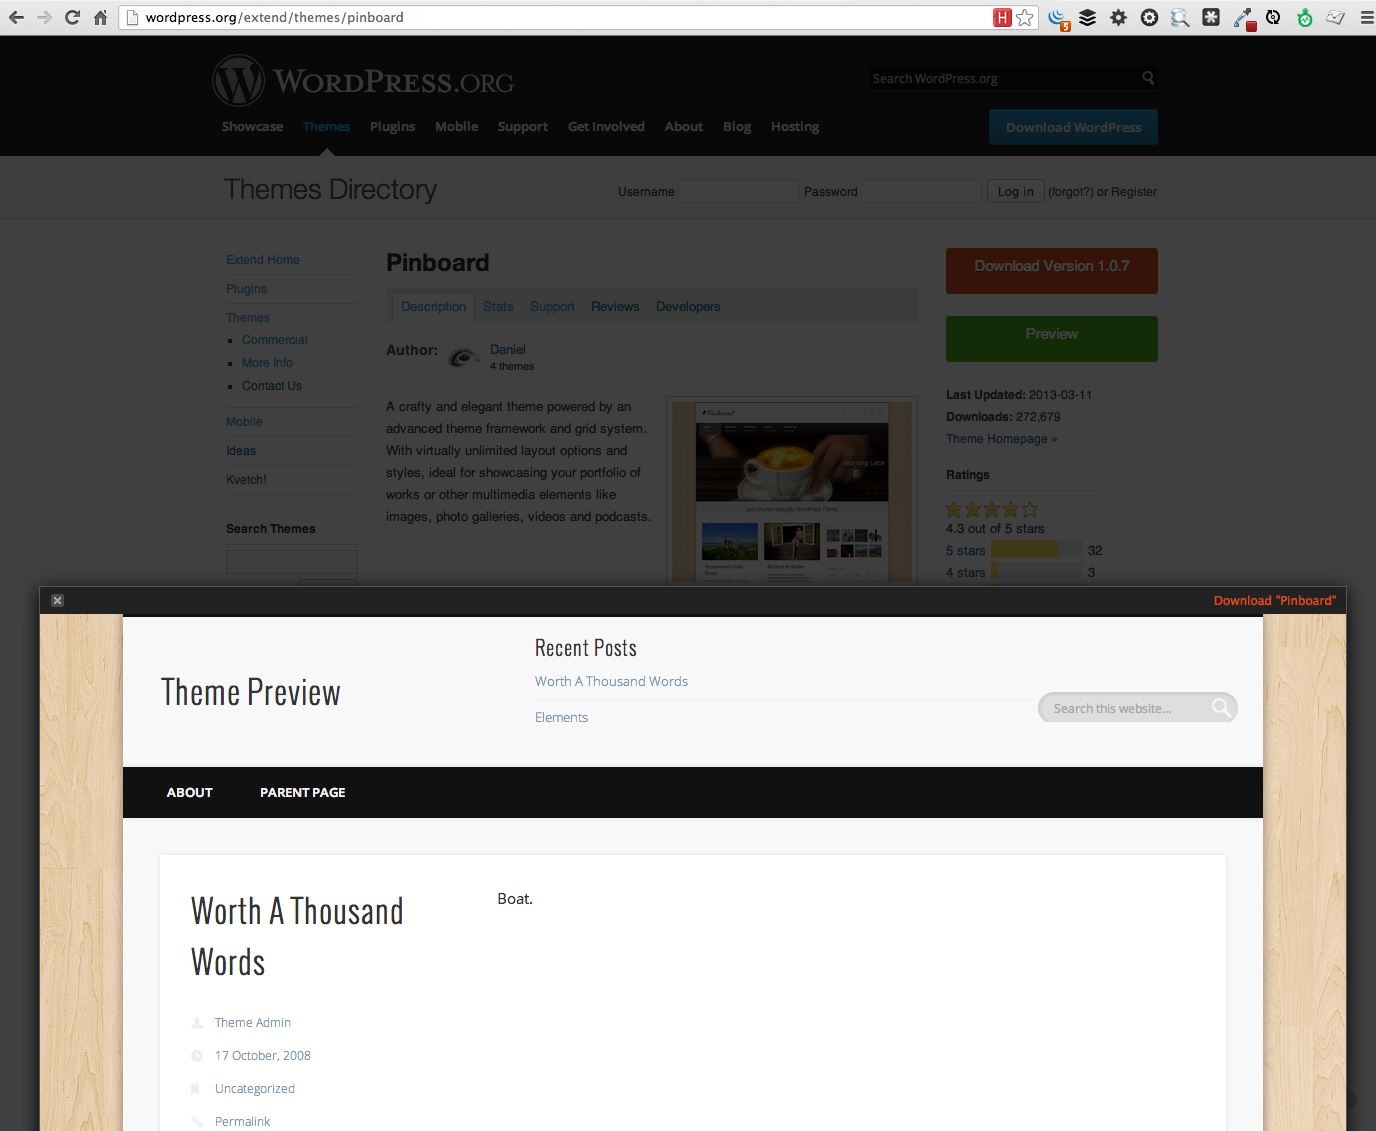 WordPress.org theme demos leave a lot to be desired